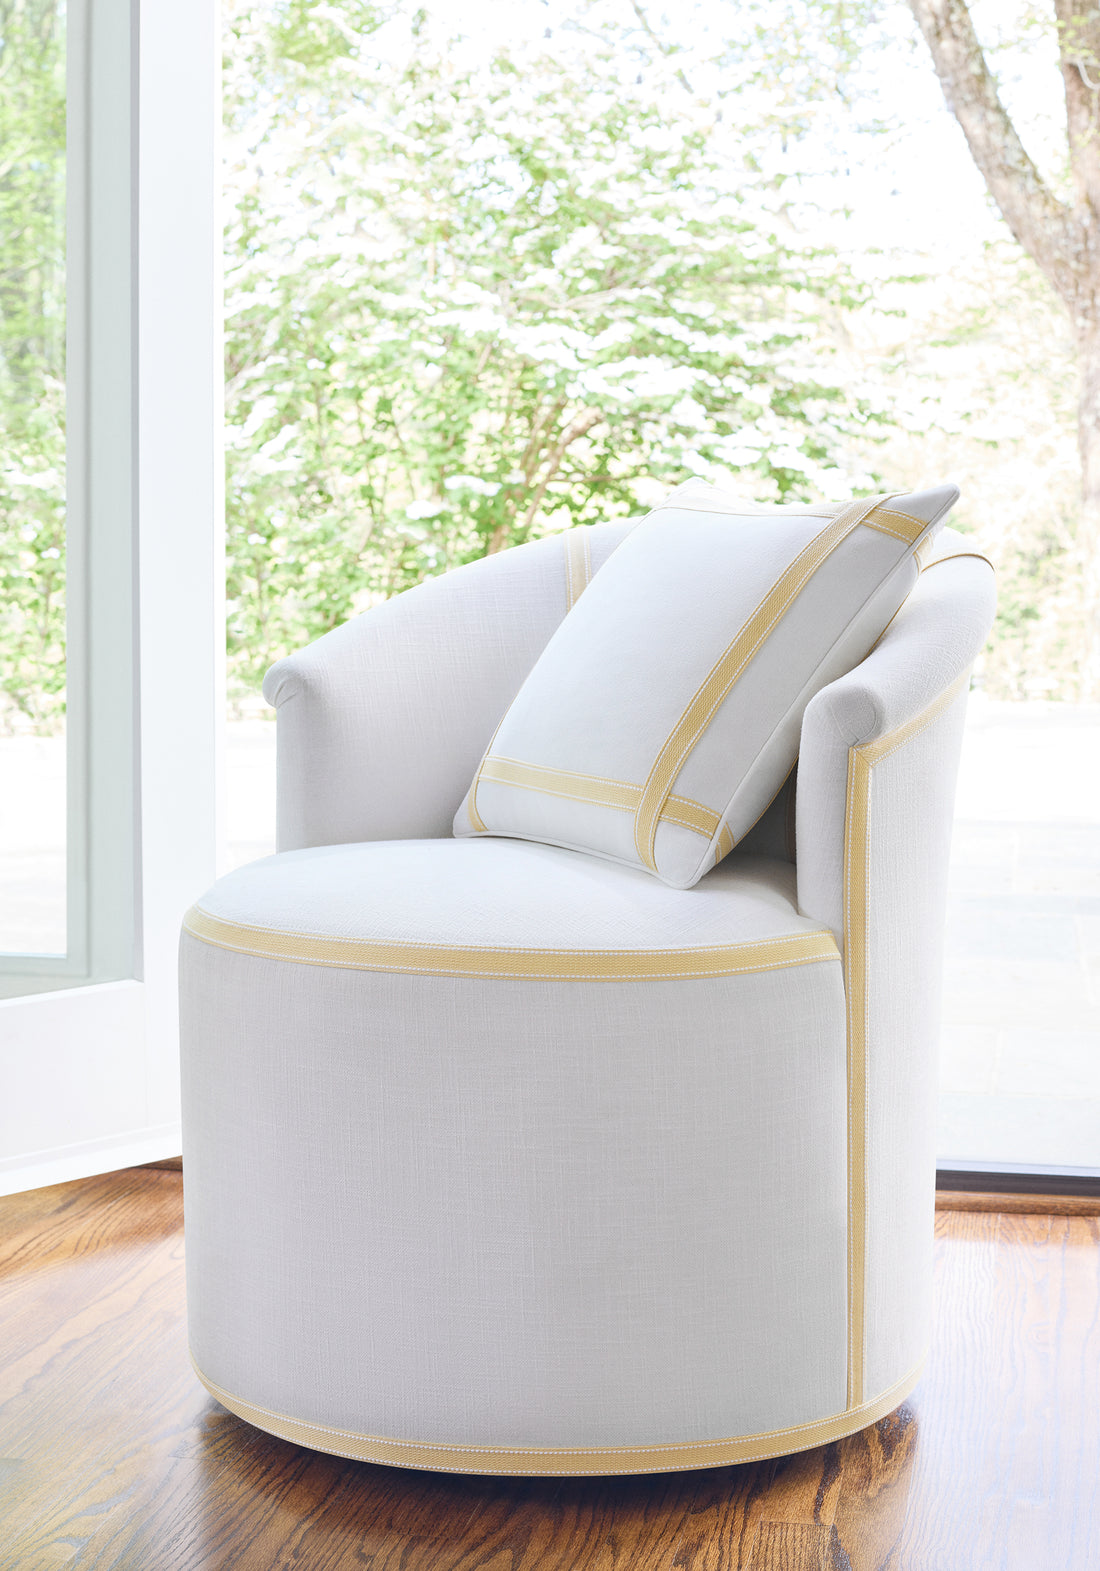 Ashby Chair with Upholstered Base in Bristol woven fabric in snow white with buttercup trim - pattern number W73418 - by Thibaut in the Landmark Textures collection